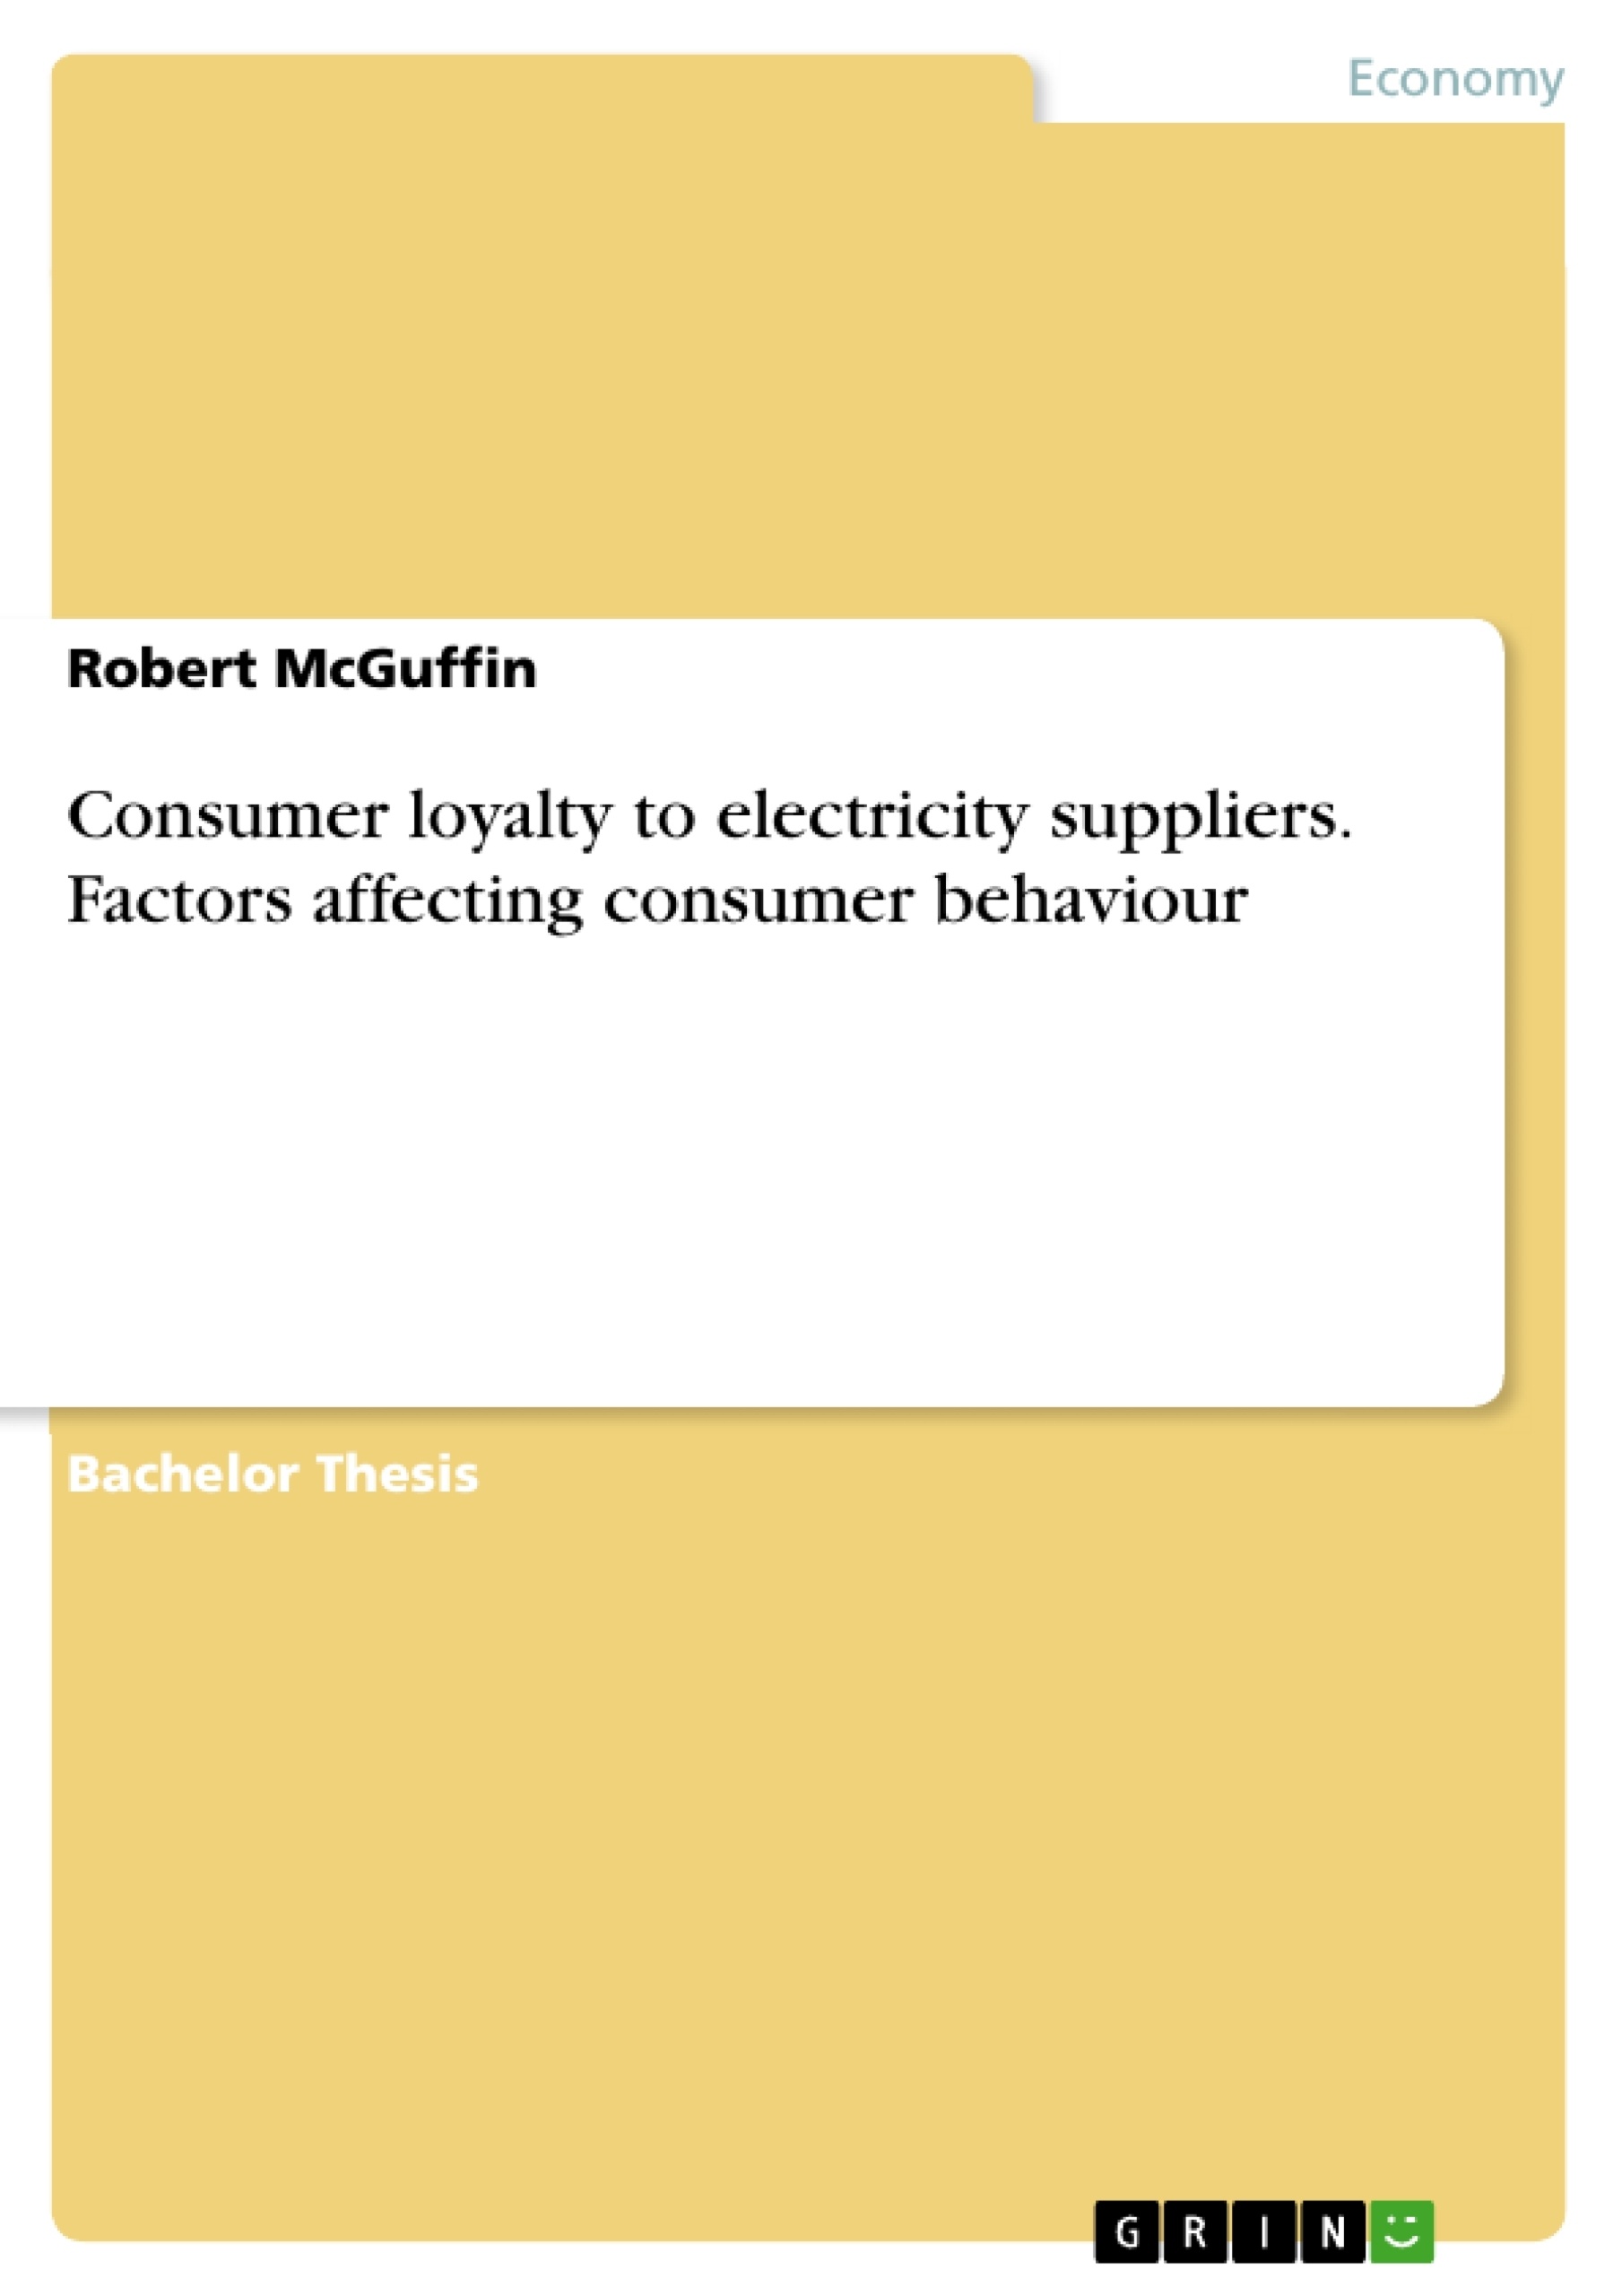 Título: Consumer loyalty to electricity suppliers. Factors affecting consumer behaviour